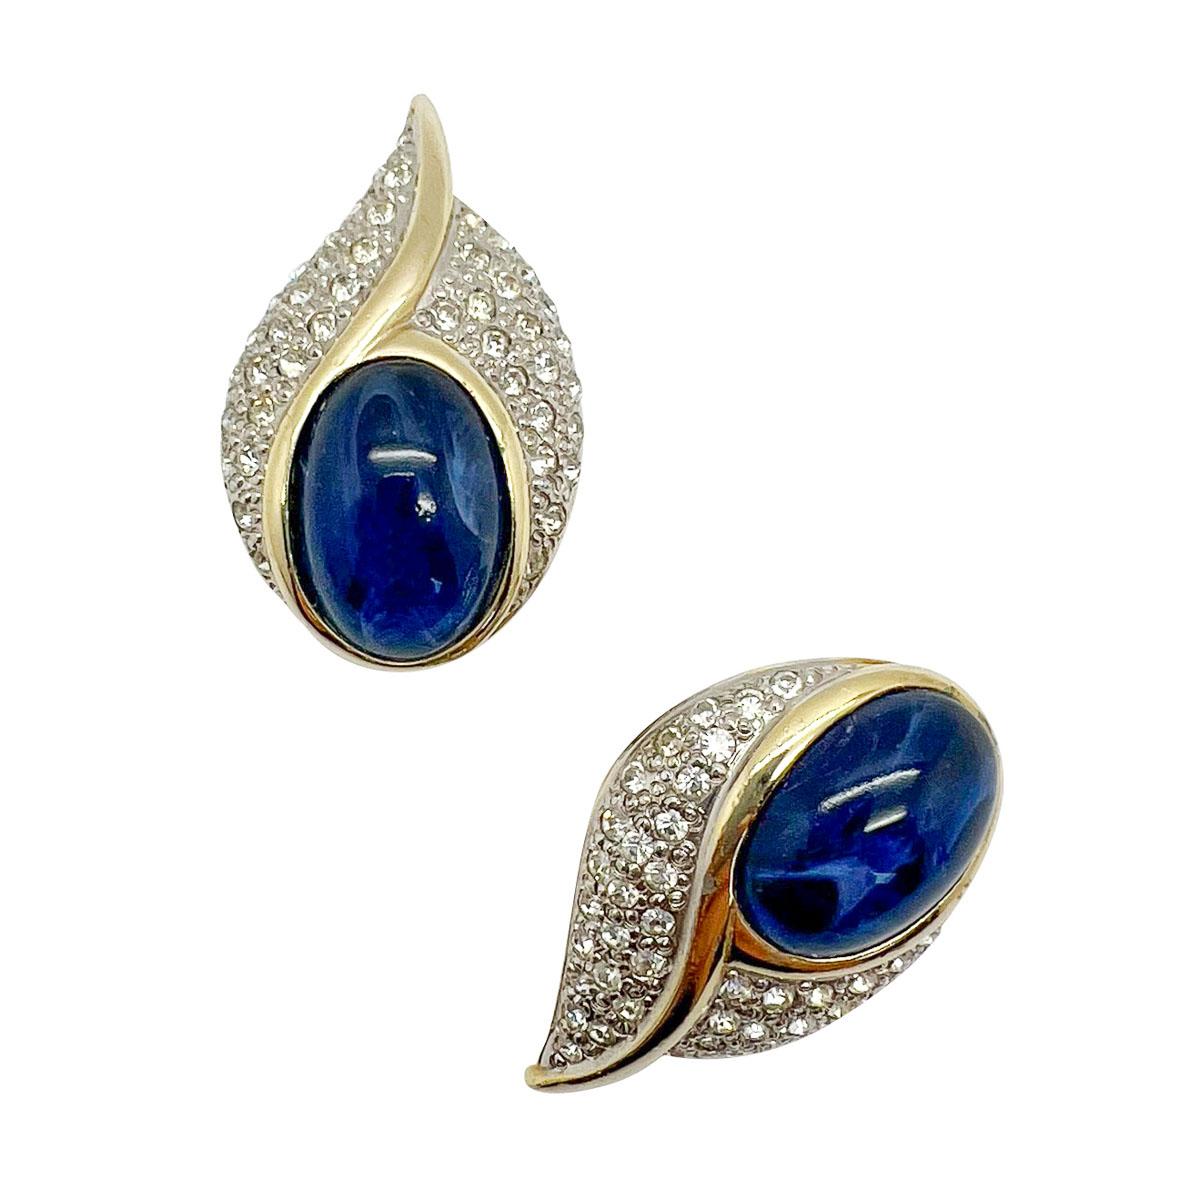 Adorable Vintage Sapphire Cabochon Earrings. The huge oval cabochon stone emulating a flawed sapphire with its silk inclusions, surround by pave set chatons in an exquisitely designed twist style mount. Sumptuous vintage that will be forever your